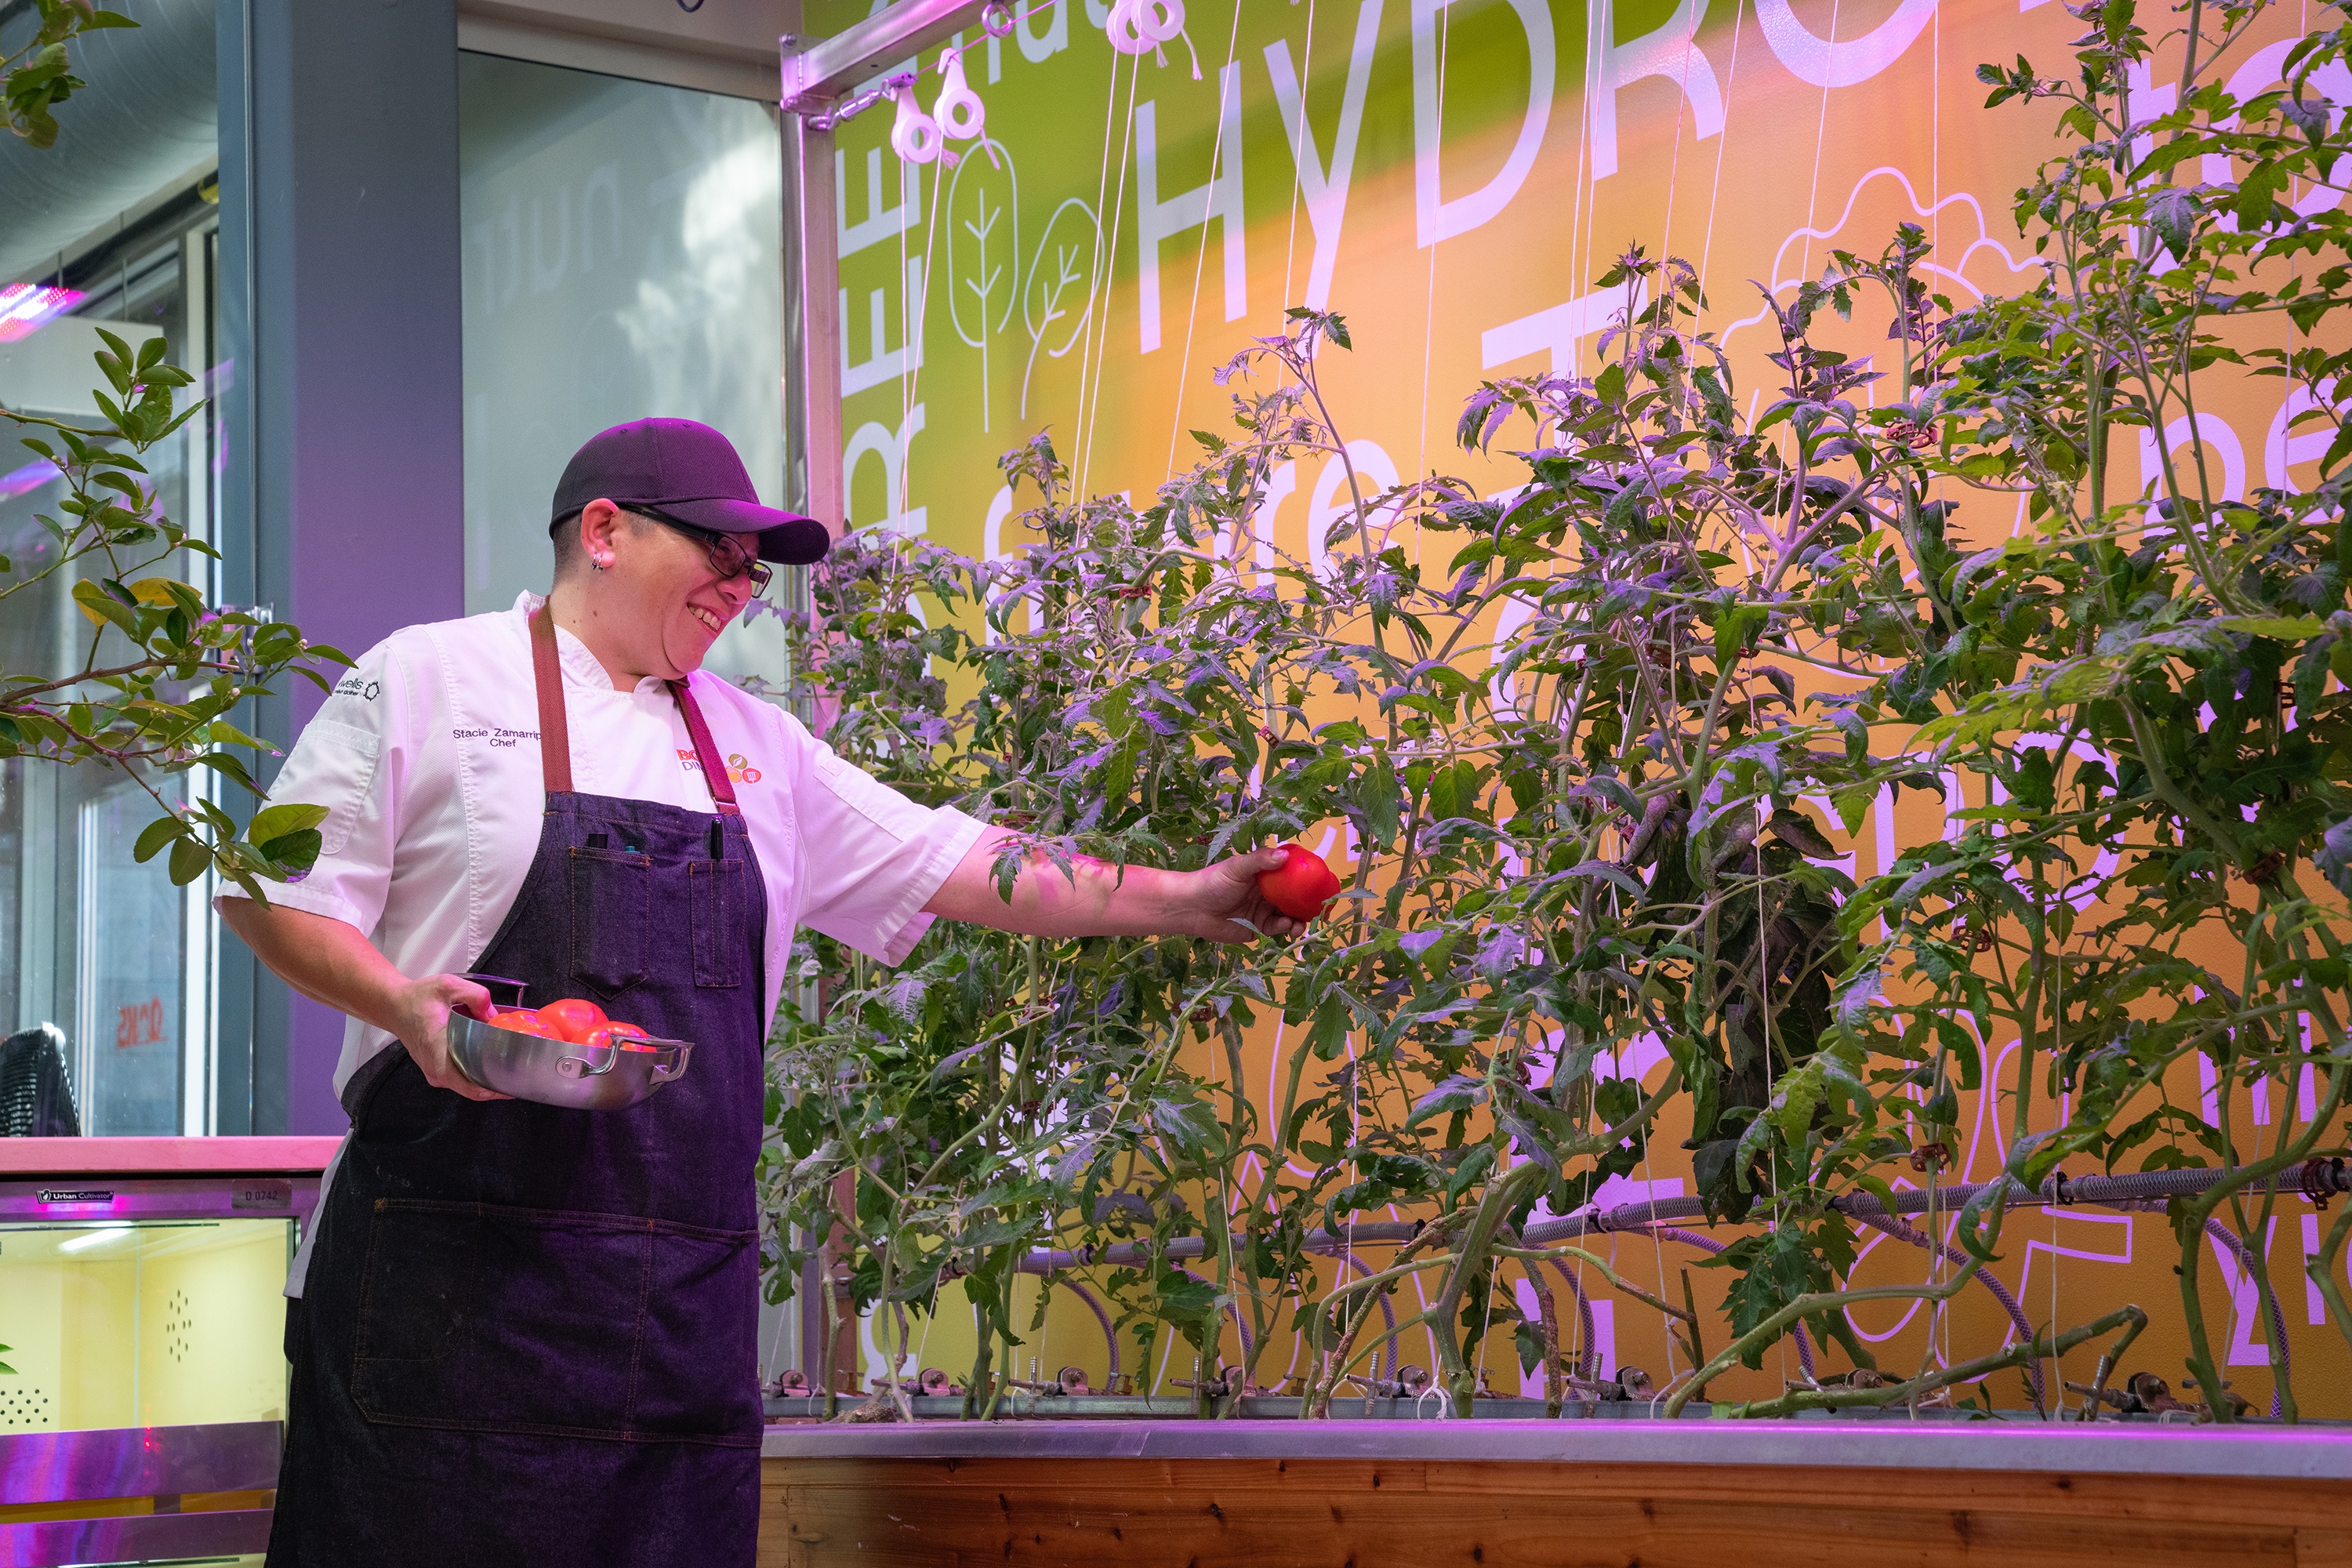 Stacie Zamarripa picking a tomato grown in the hydroponics systems